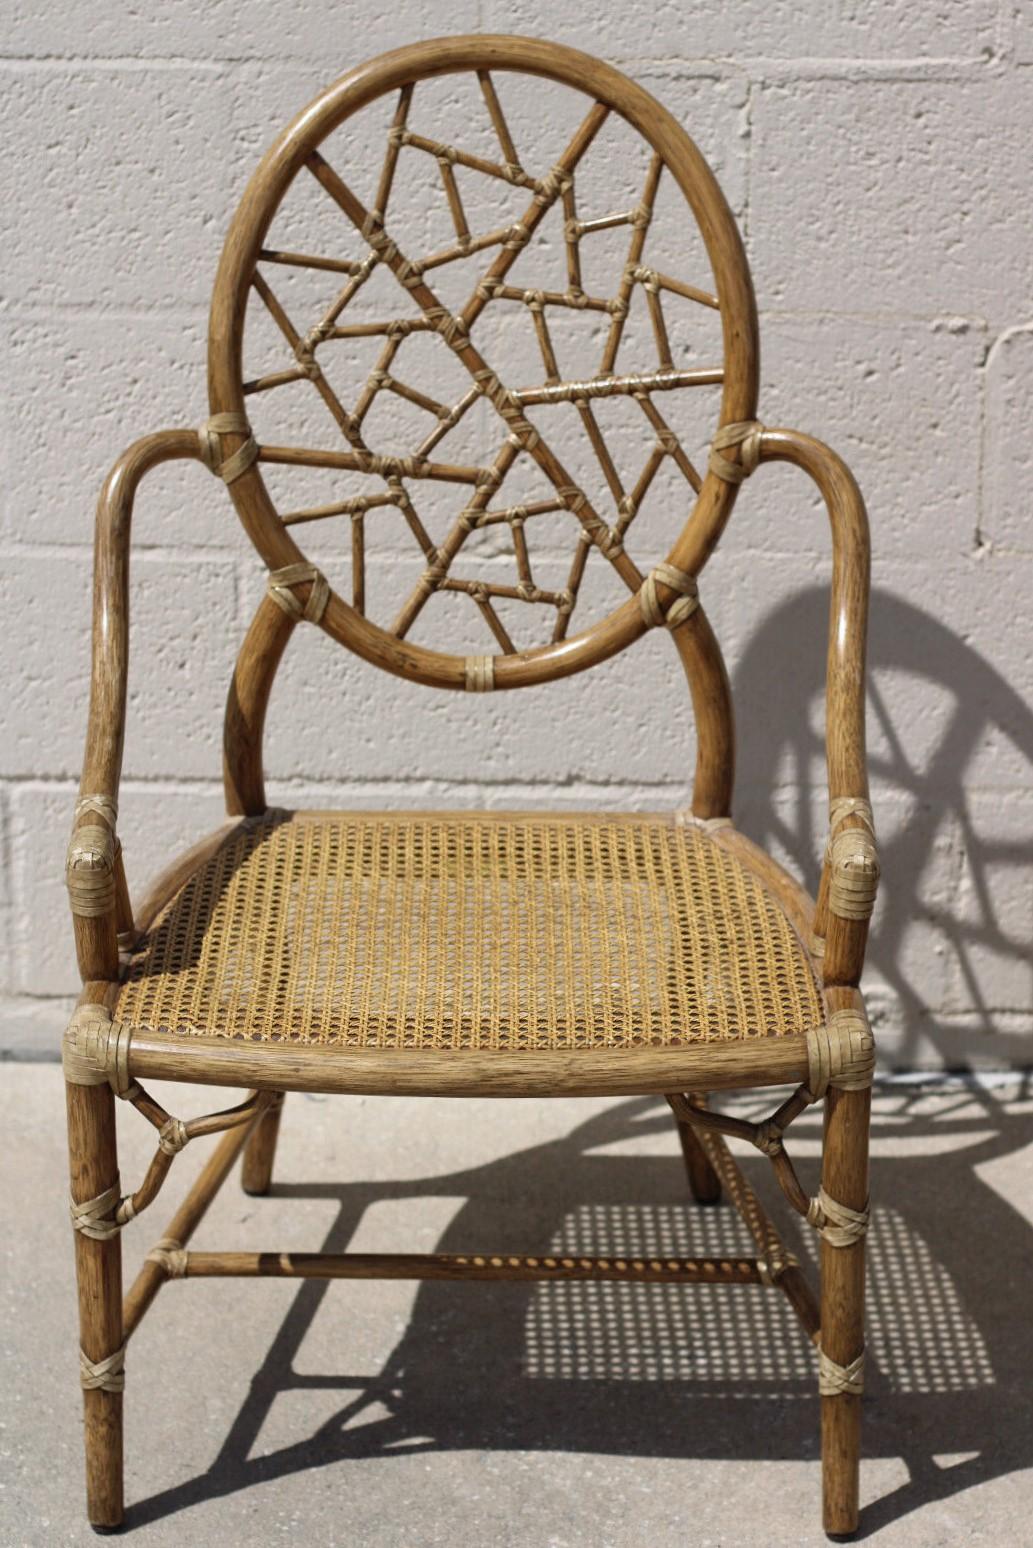 A set of four iconic rattan cracked ice chairs designed by breakthrough innovator Elinor McGuire. The design is famous for its rattan oval back that frames smaller rattan pieces bound by rawhide, creating the impression of cracked ice or shattered